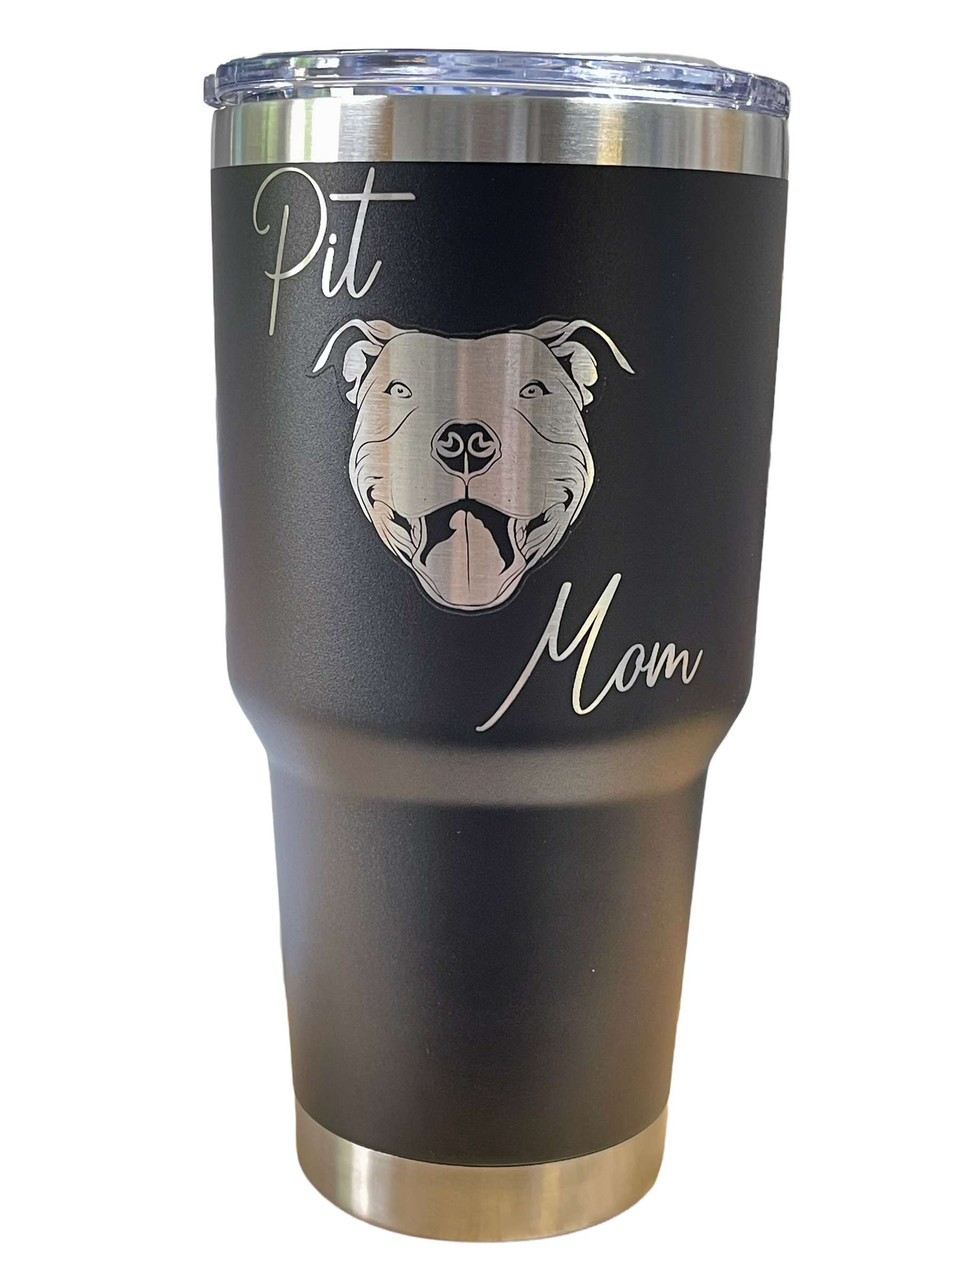 https://cdn11.bigcommerce.com/s-gu5hxc0z64/images/stencil/1280x1280/products/3650/6717/Yeti-Style-30oz-Insulated-Cup-Pit-Mom_6716__33004.1657861416.jpg?c=1